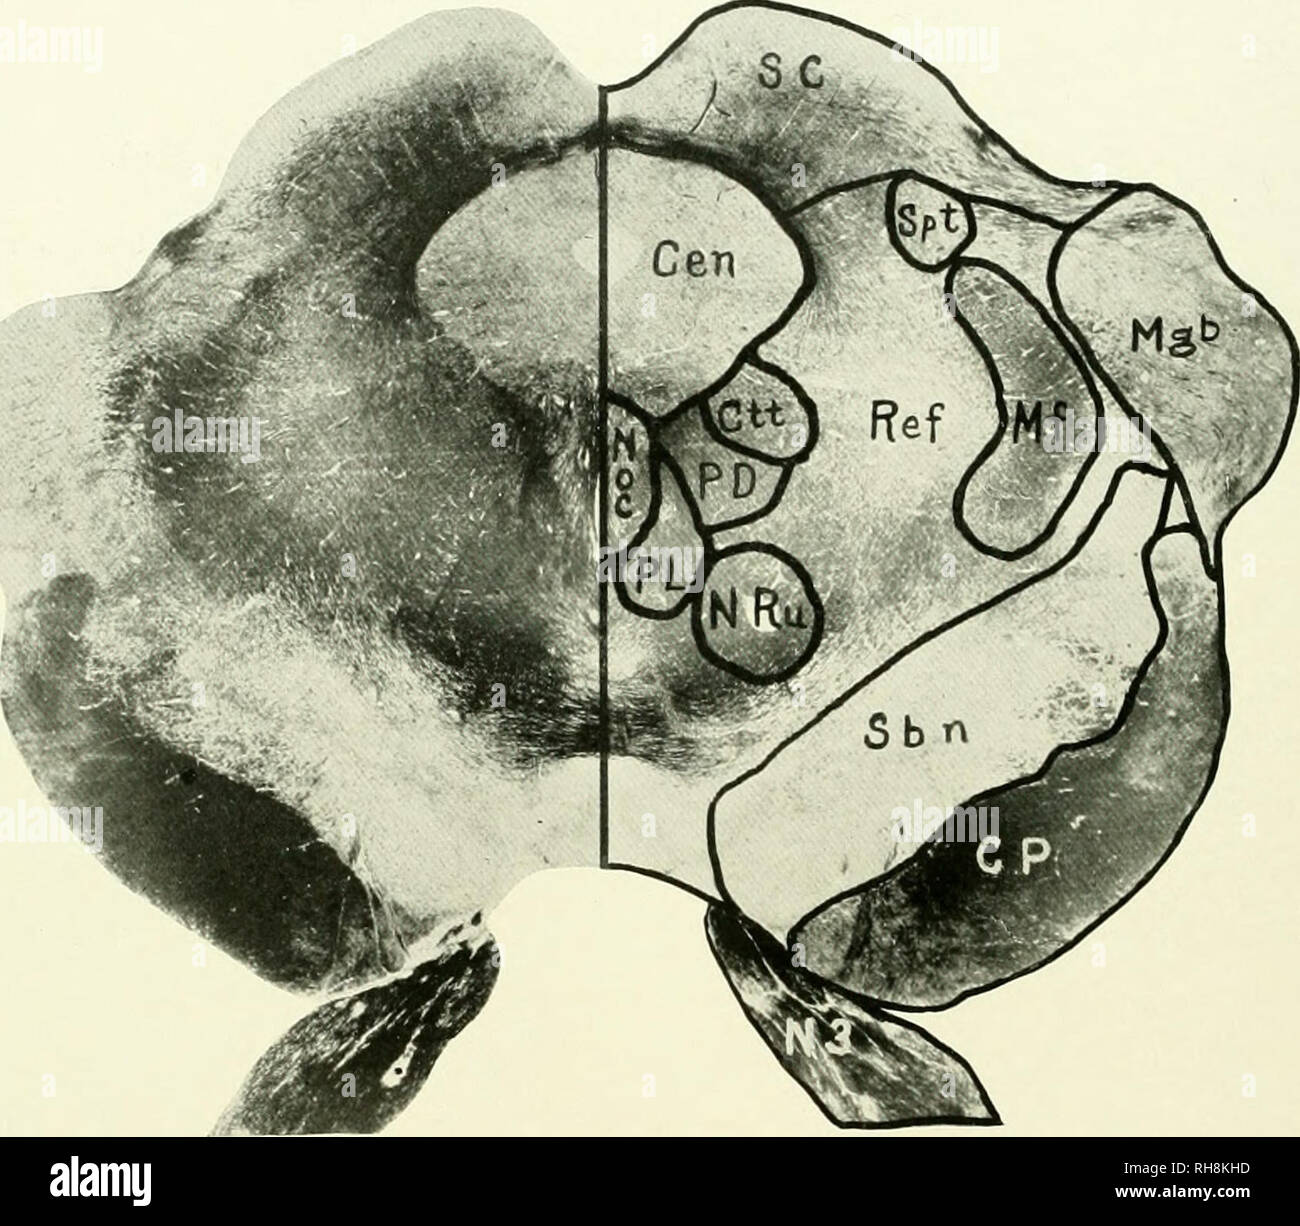 . The brain from ape to man; a contribution to the study of the evolution and development of the human brain. Brain; Evolution; Pongidae. 442 THE INTERMEDIATE PRIMATES both factors have contributed some additional prominence to the red nucleus in gibbon. That its striorubral portion has undergone expansion might be expected in an animal presenting such complex arboreal locomotion. That. FIG. 209. GIBBON. LEN'EL OF THE SUPERIOR COLLICULUS. CEN, Central Gray Matter; cp. Cerebral Peduncle; ctt. Central Tegmental Tract; mf, Mesial Fillet; mgb, Mesial Geniculate Body; noc. Nucleus Oculomotorius; nr Stock Photo